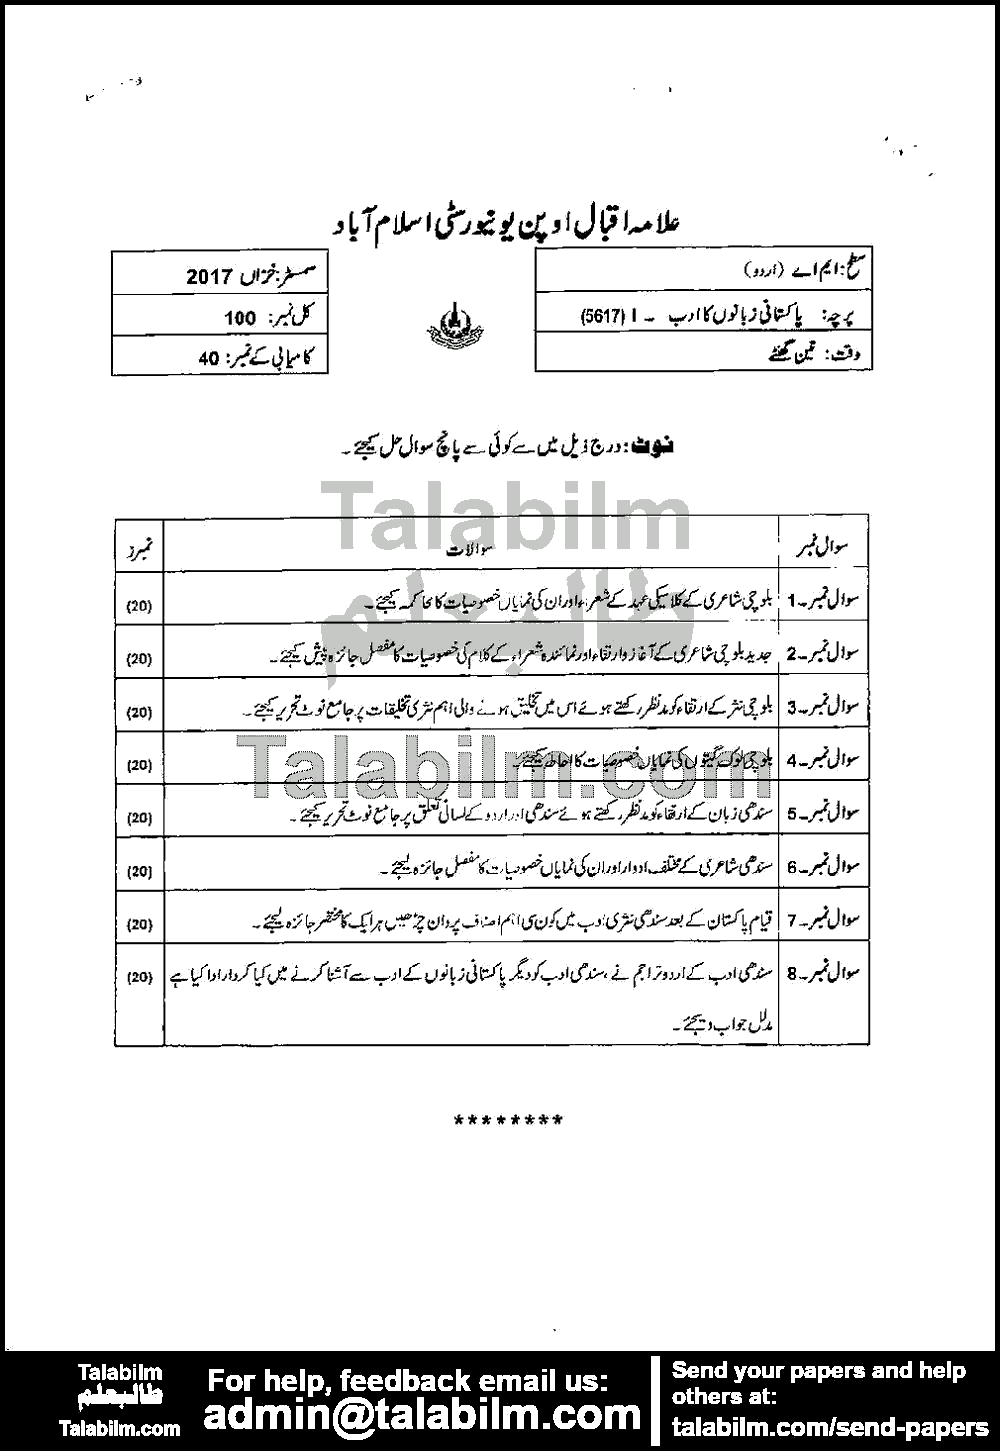 aiou solved assignment code 5617